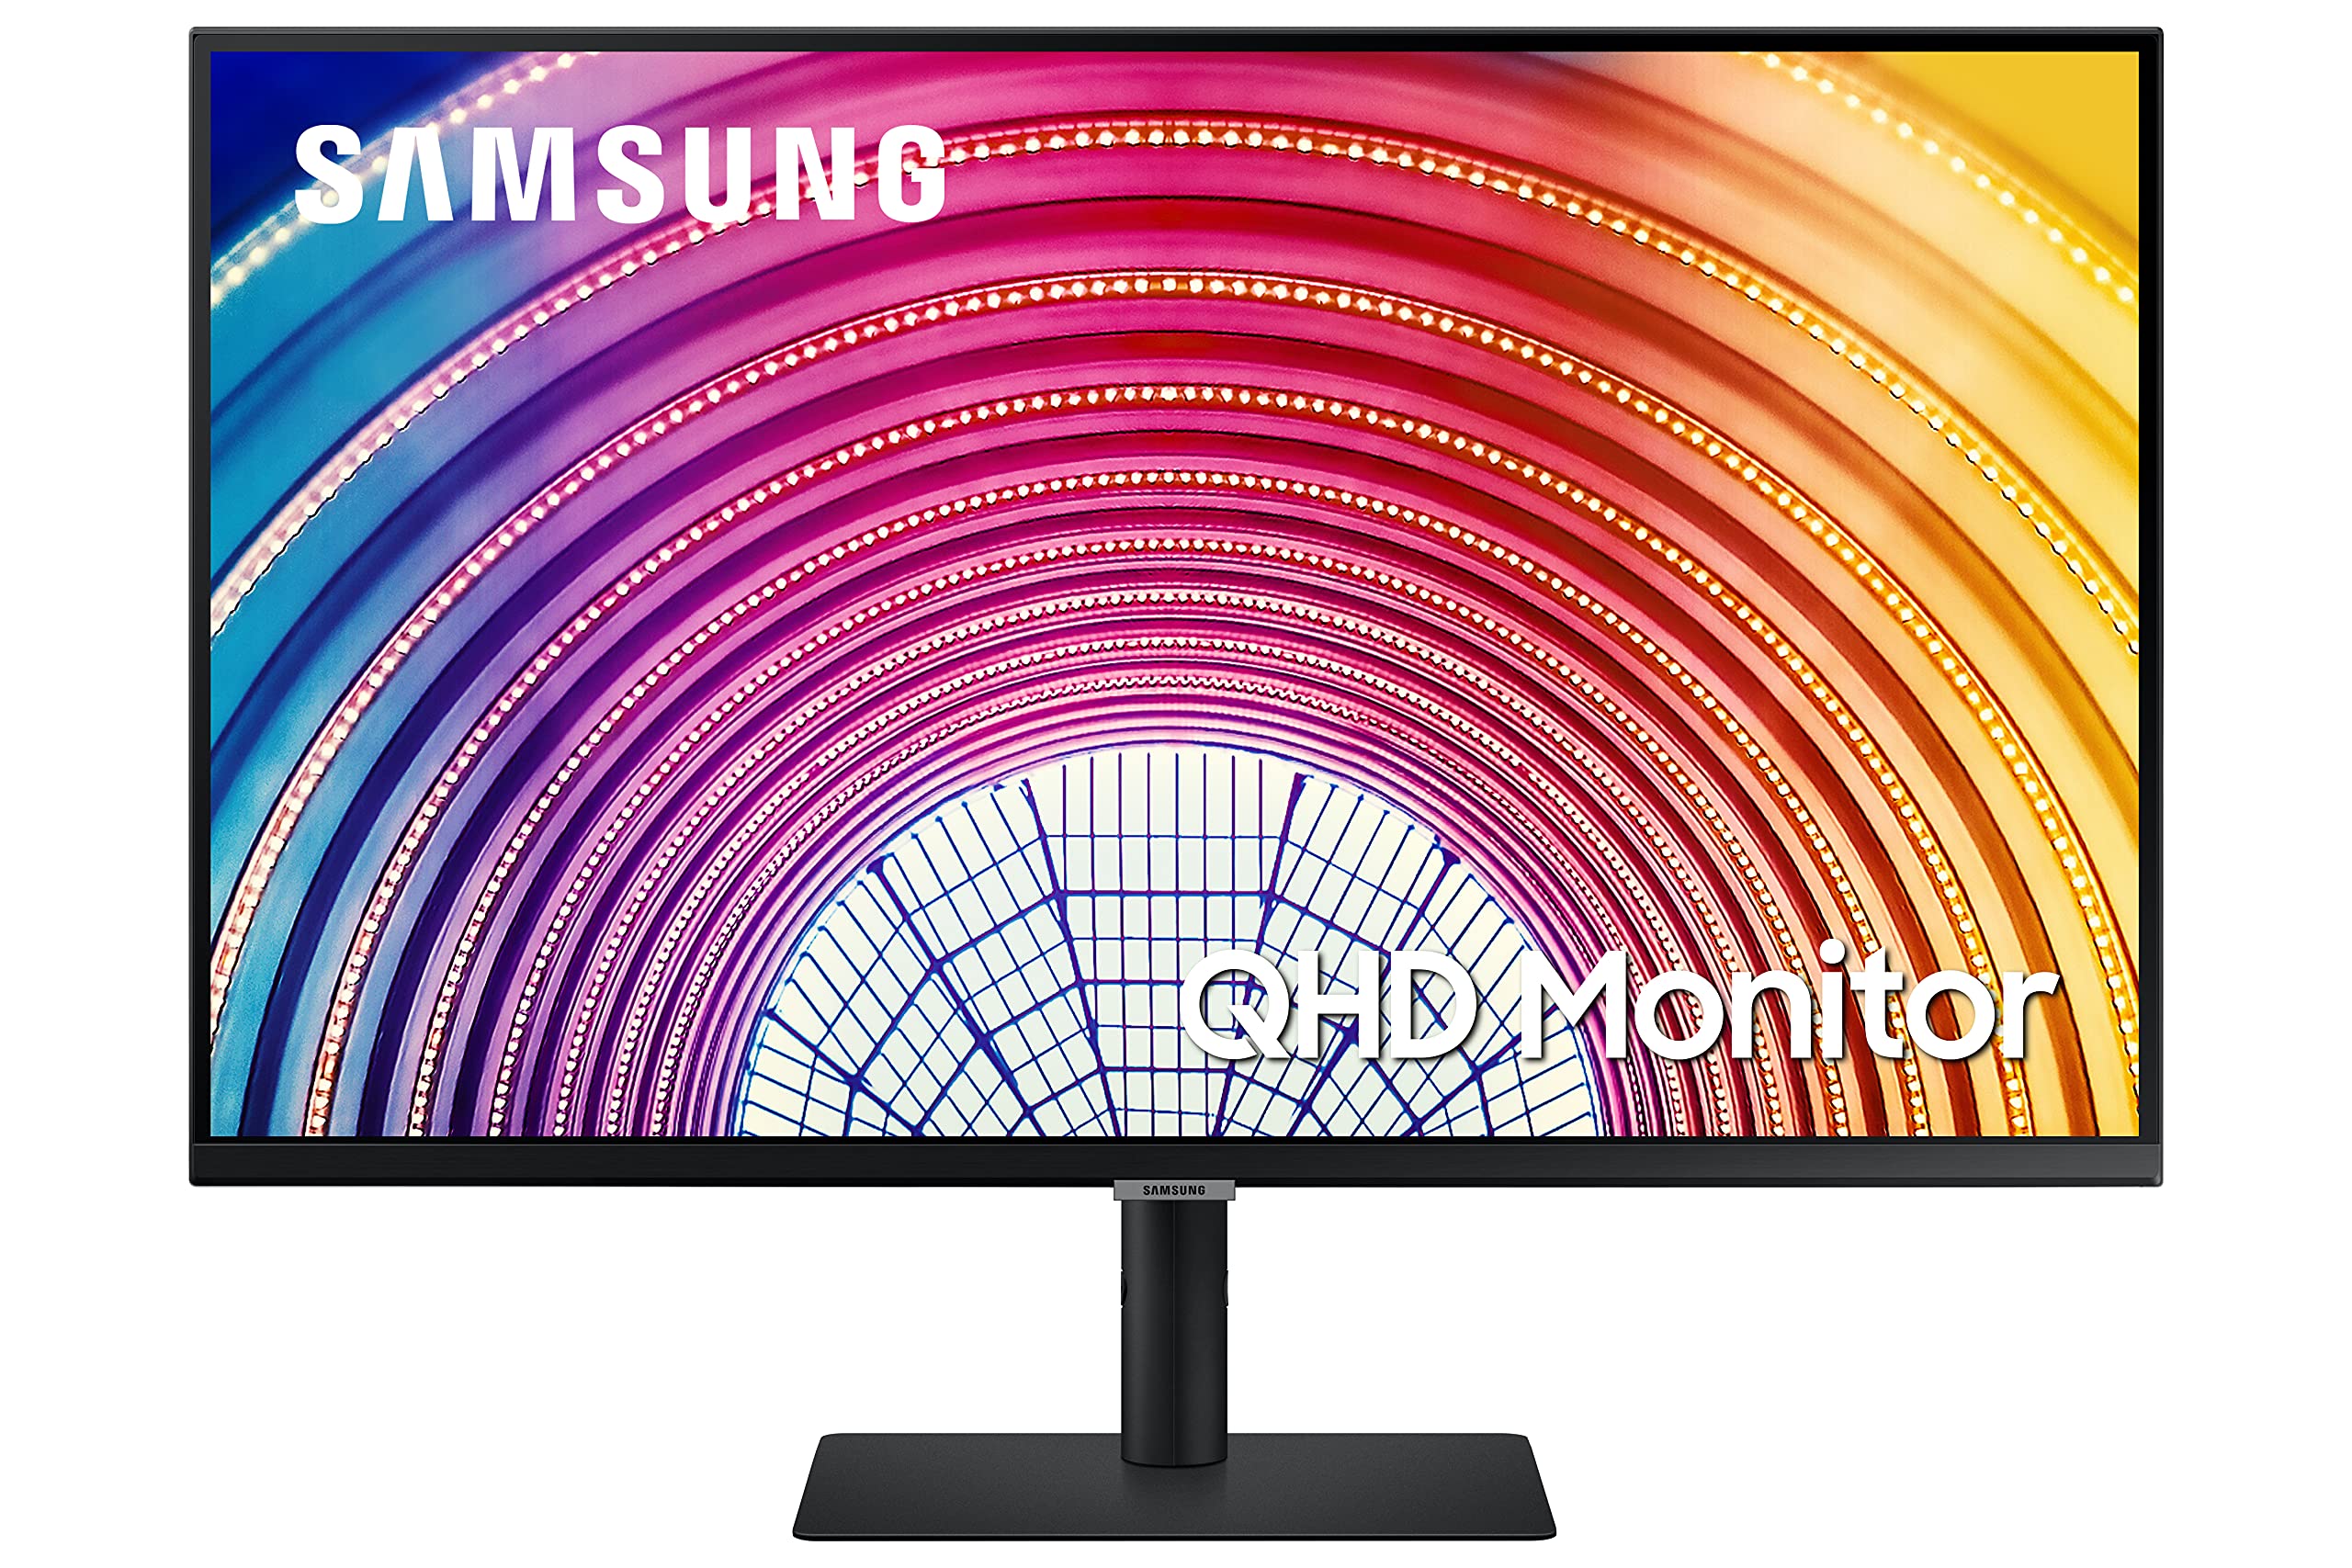 Samsung 24 Inch QHD Computer Monitor, 75Hz, HDMI Monitor, Vertical Monitor, 1440p IPS Monitor, HDR10 (1 Billion Colors), TUV-Certified Intelligent Eye Care, S60A (LS24A600NWNXGO)